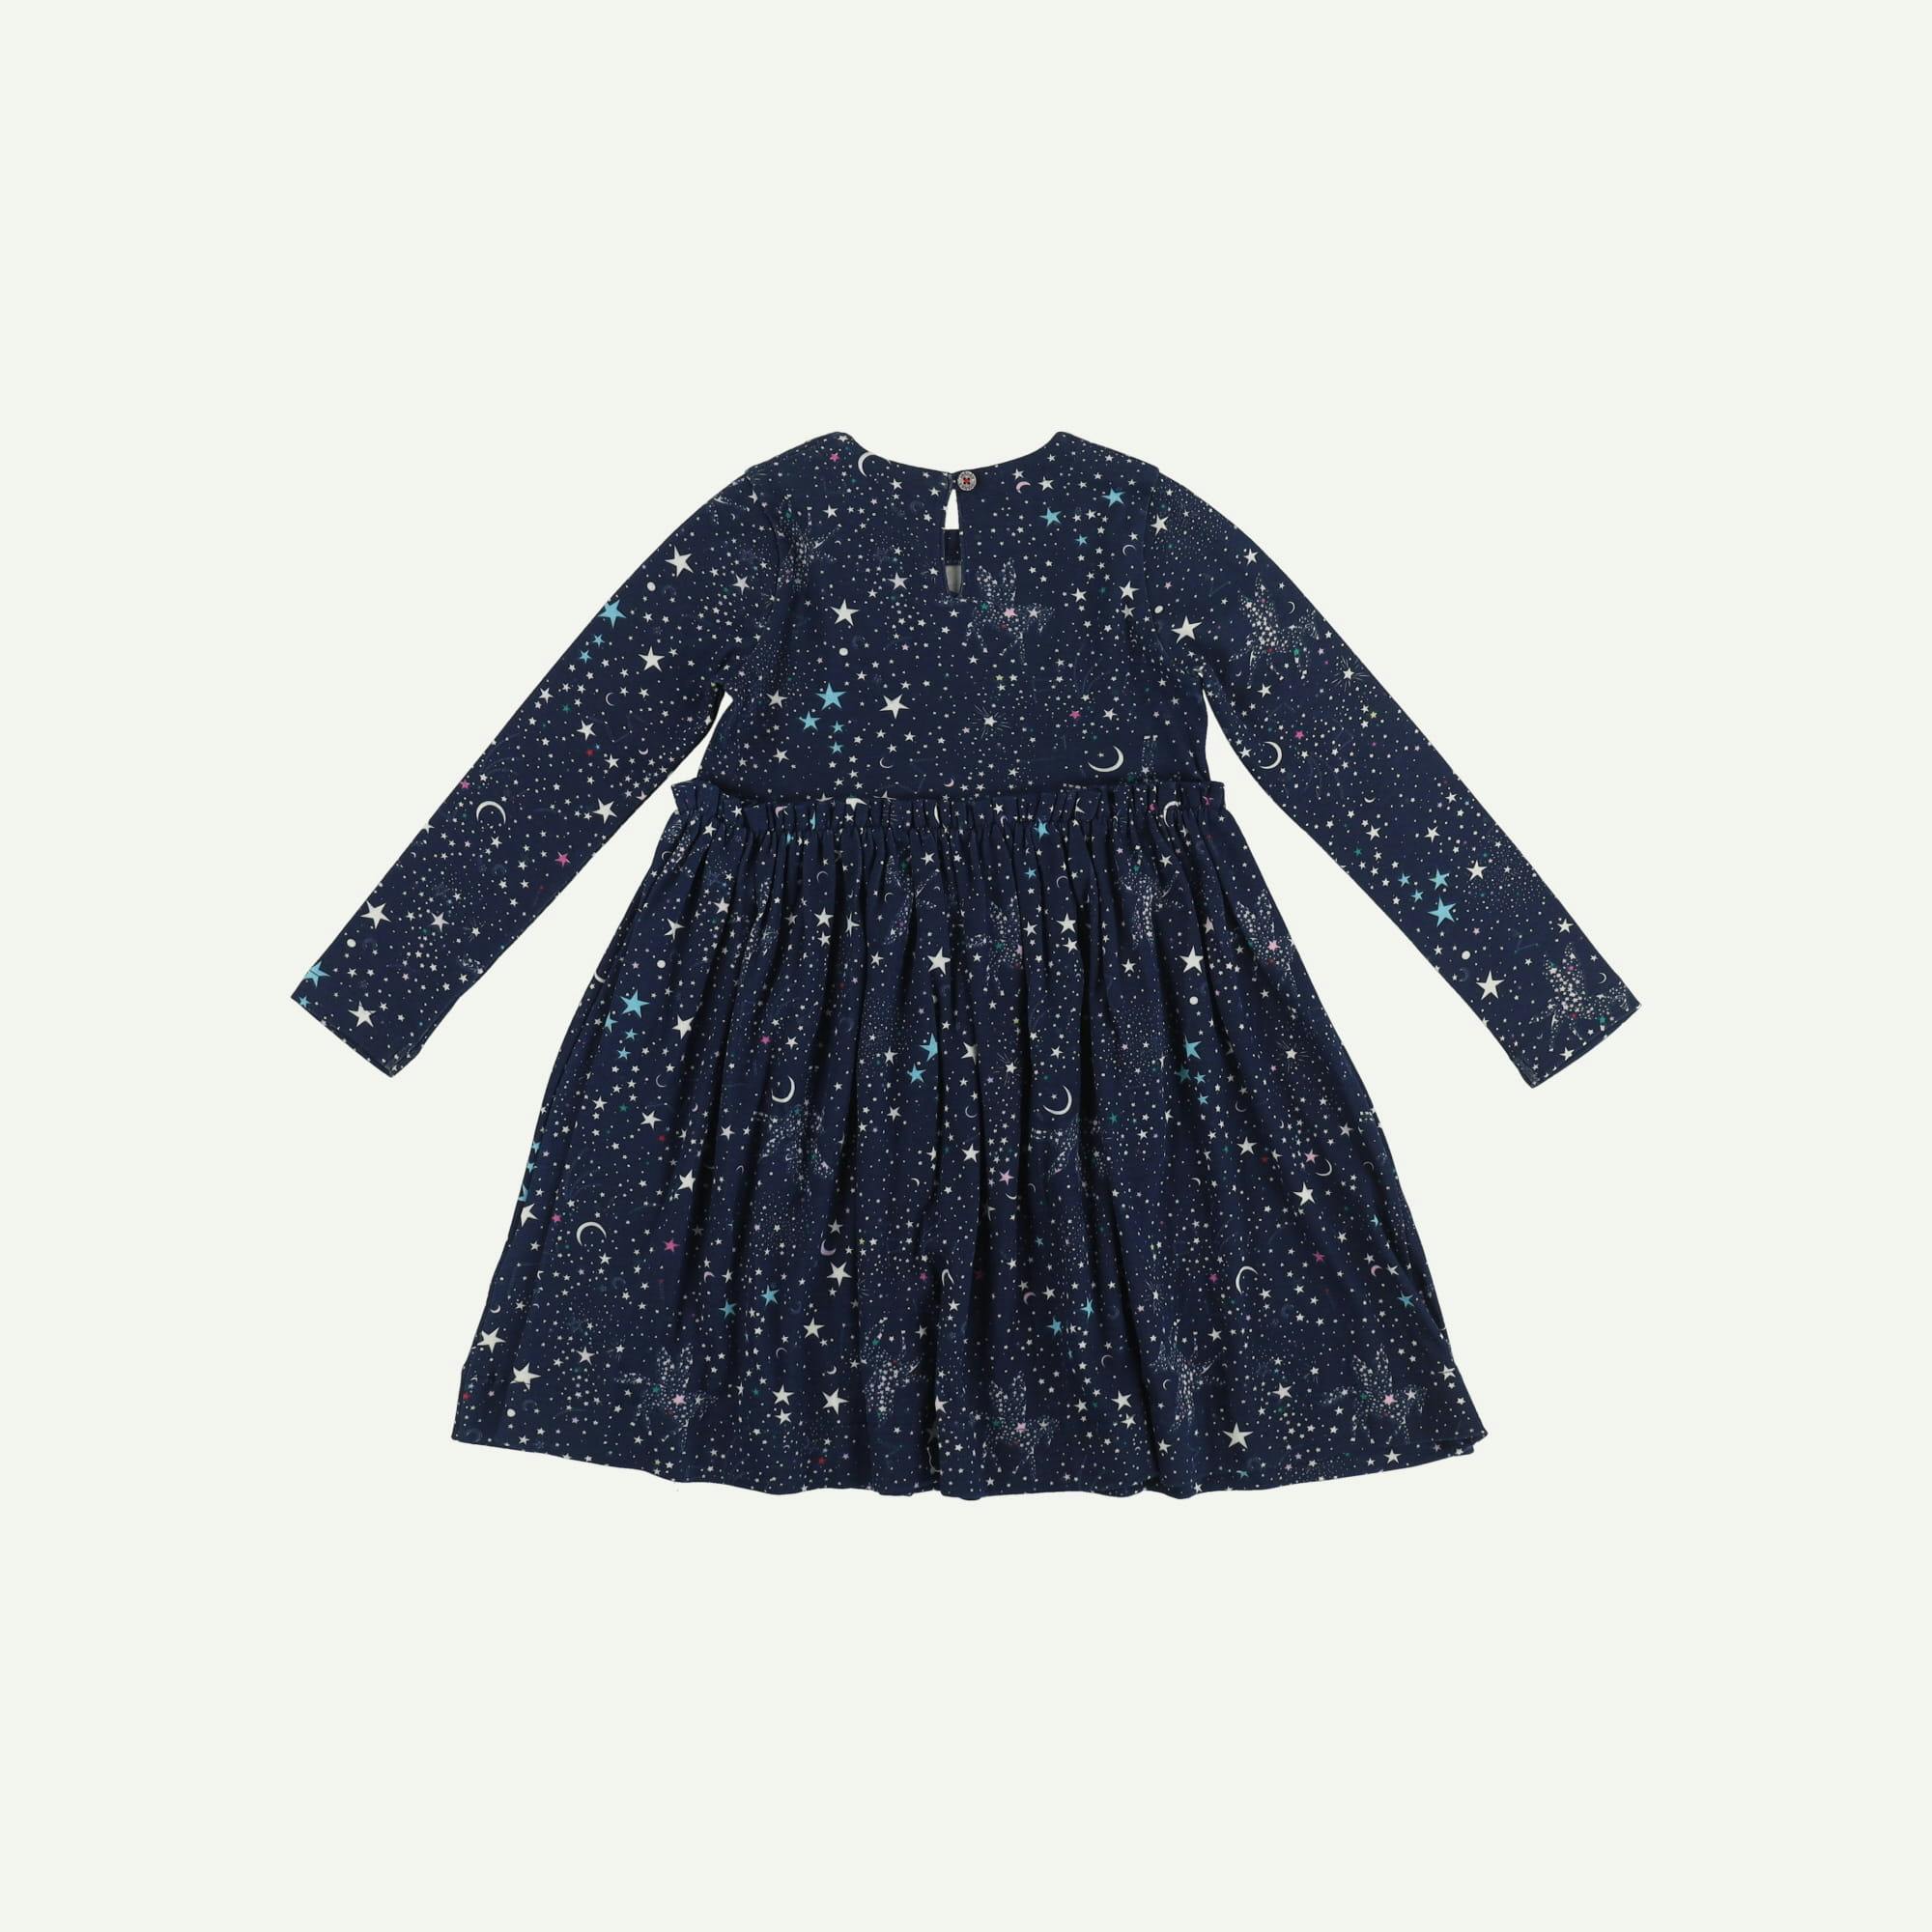 Joules As new Navy Dress